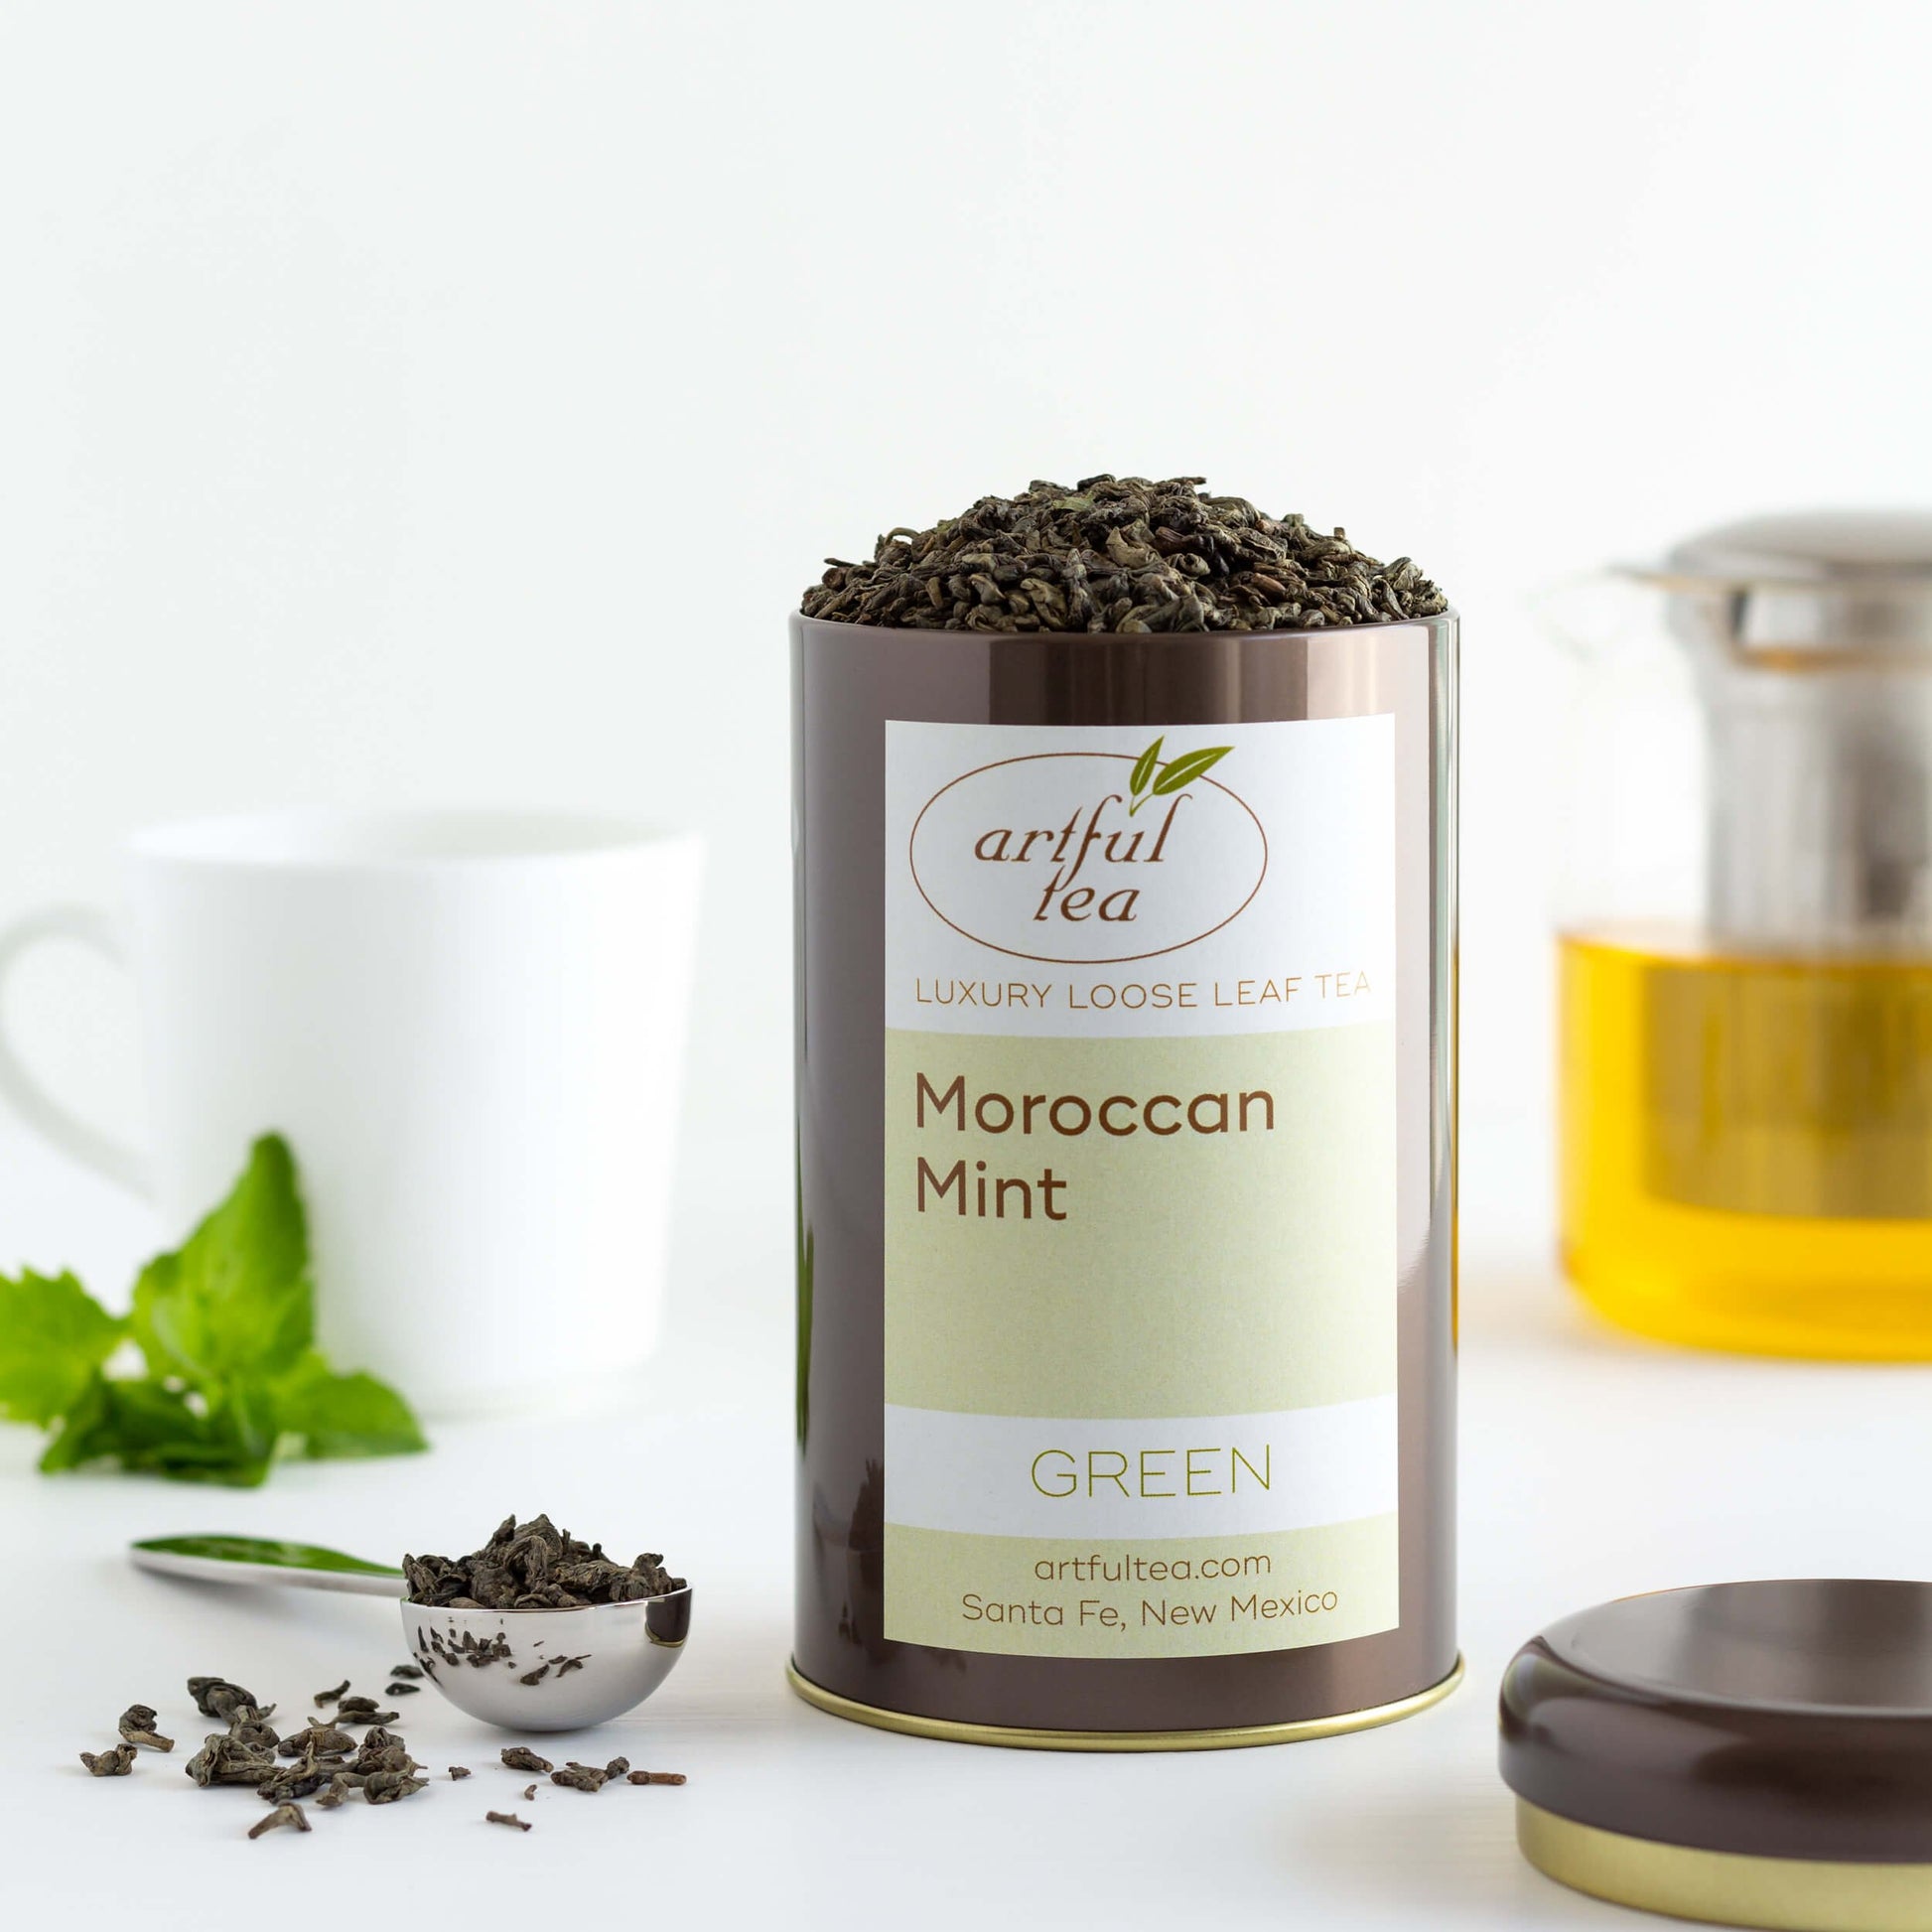 Moroccan Mint Green Tea shown packaged in a brown tin with the lid off, next to a tea scoop of loose tea leaves. A glass teapot and a white mug with mint leaves are in the background